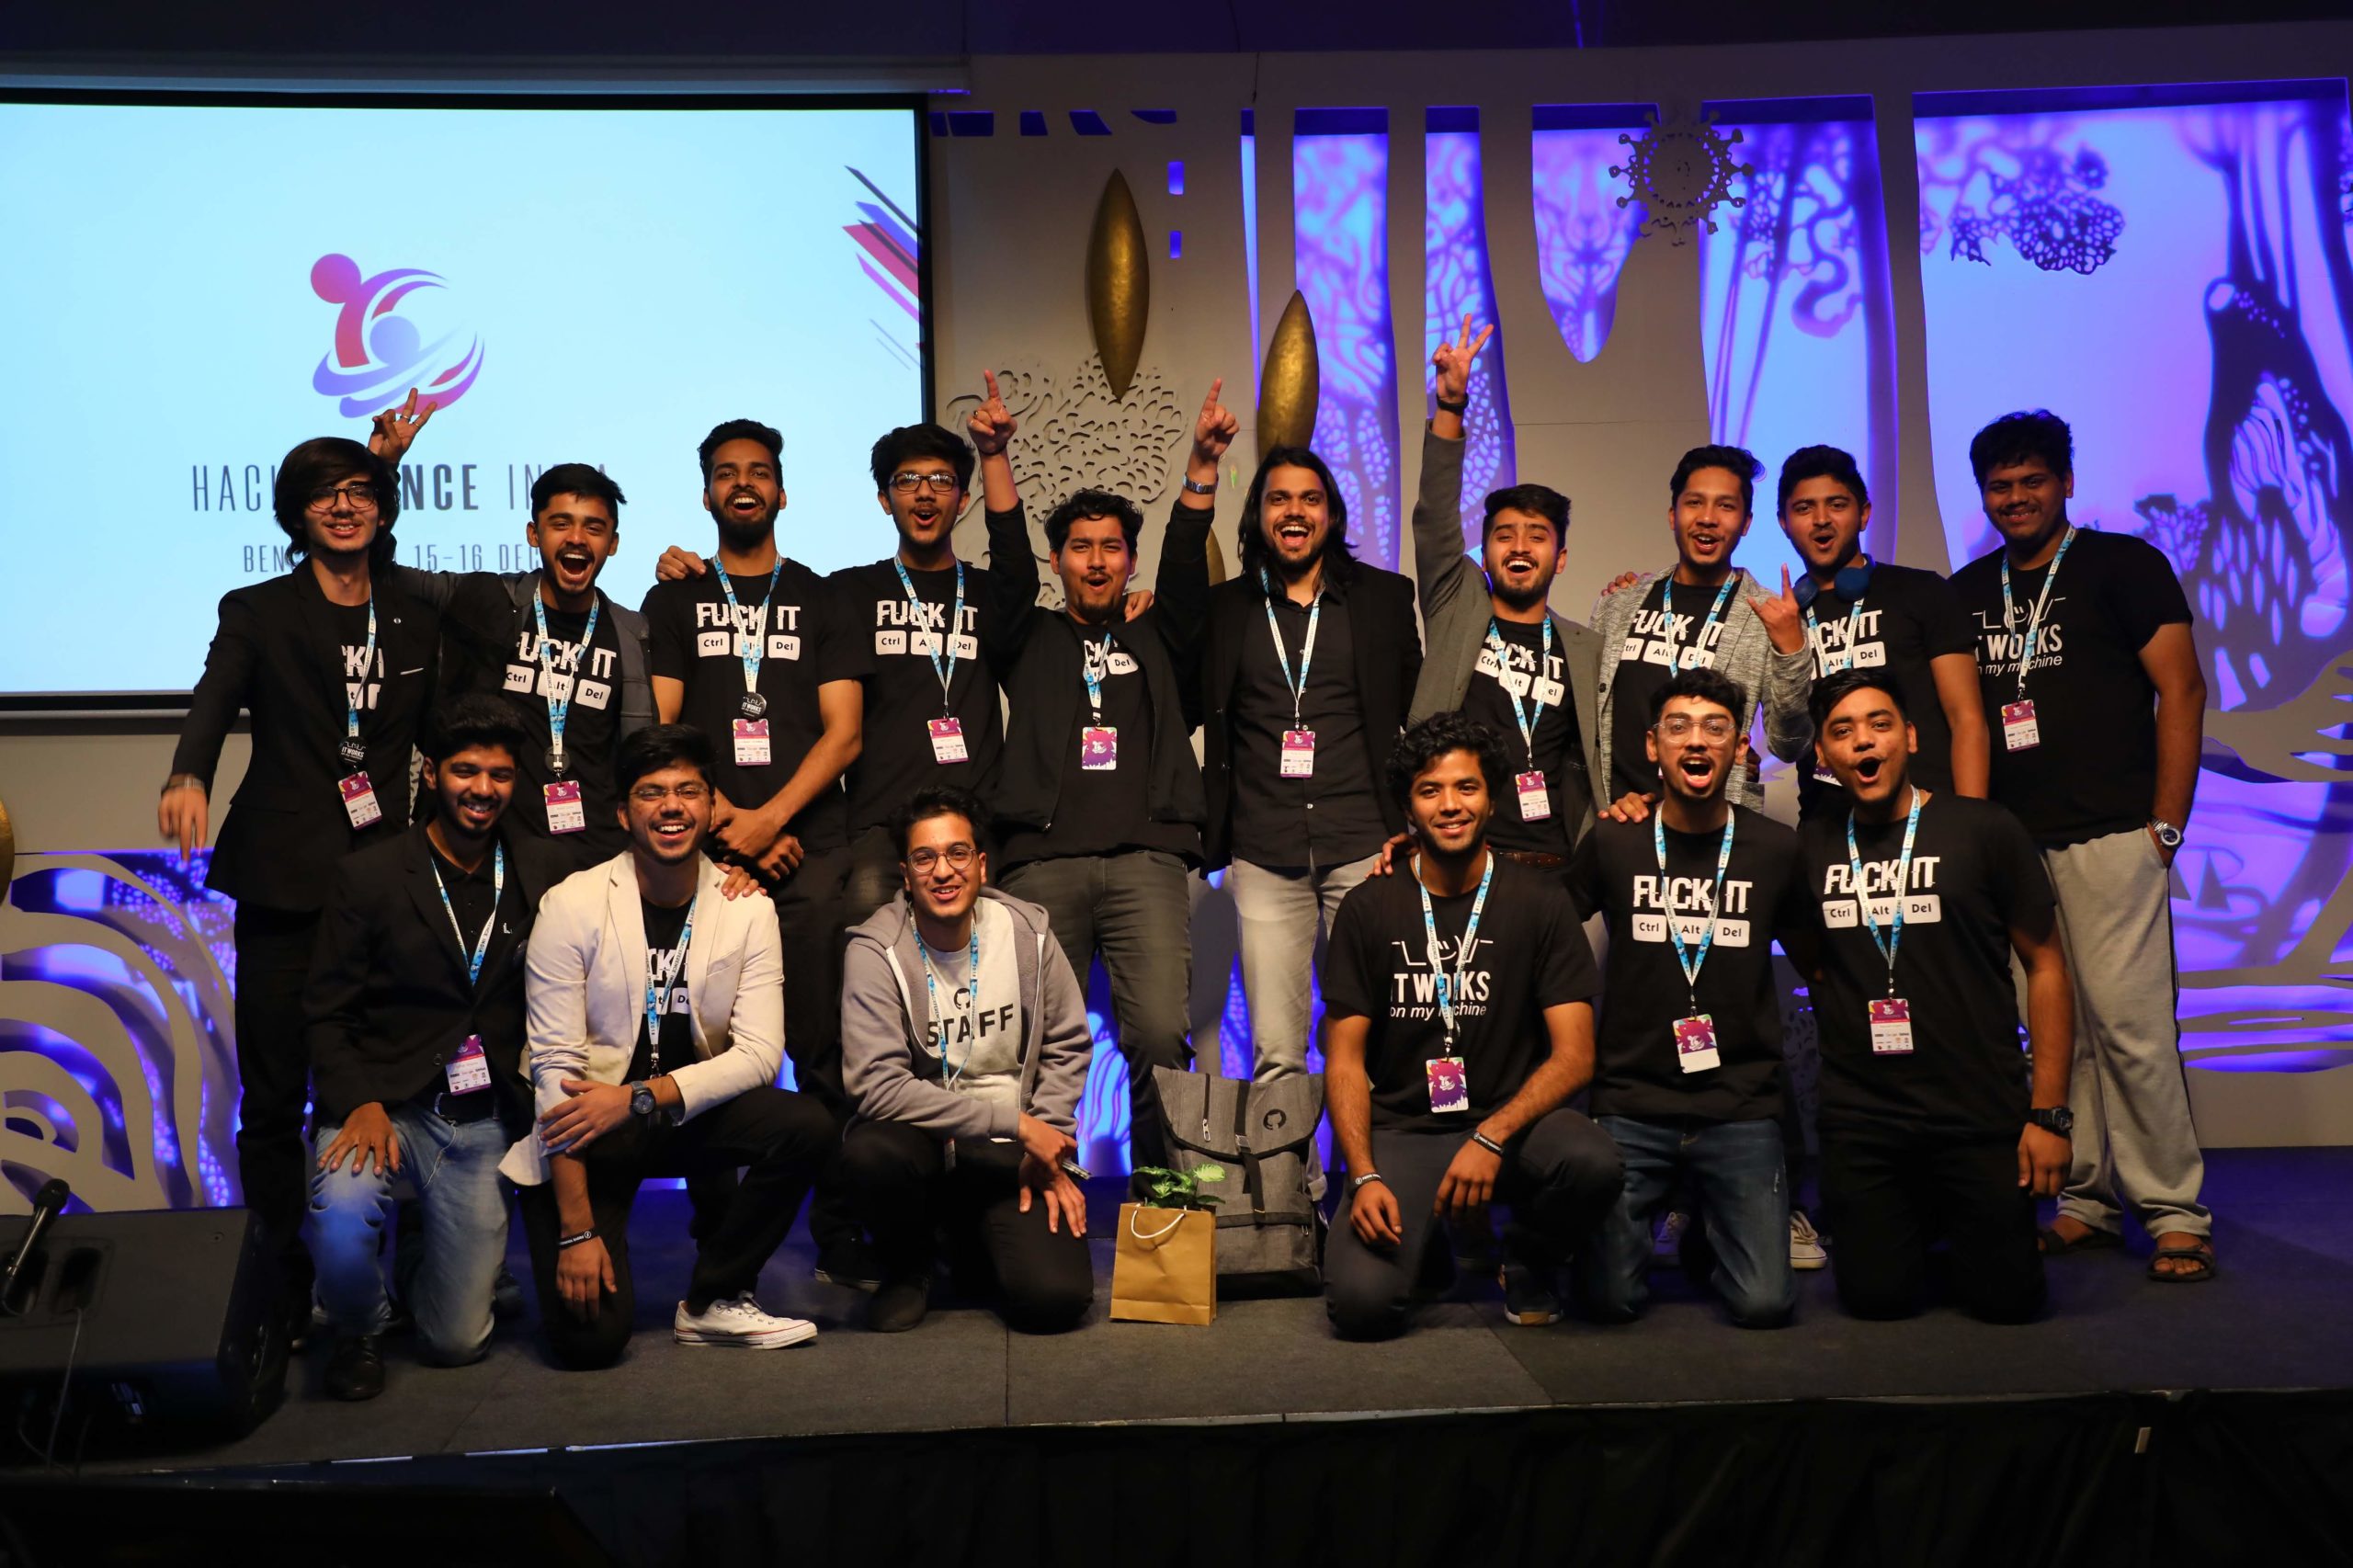 Team Hackference India - People from Bangalore ❤️